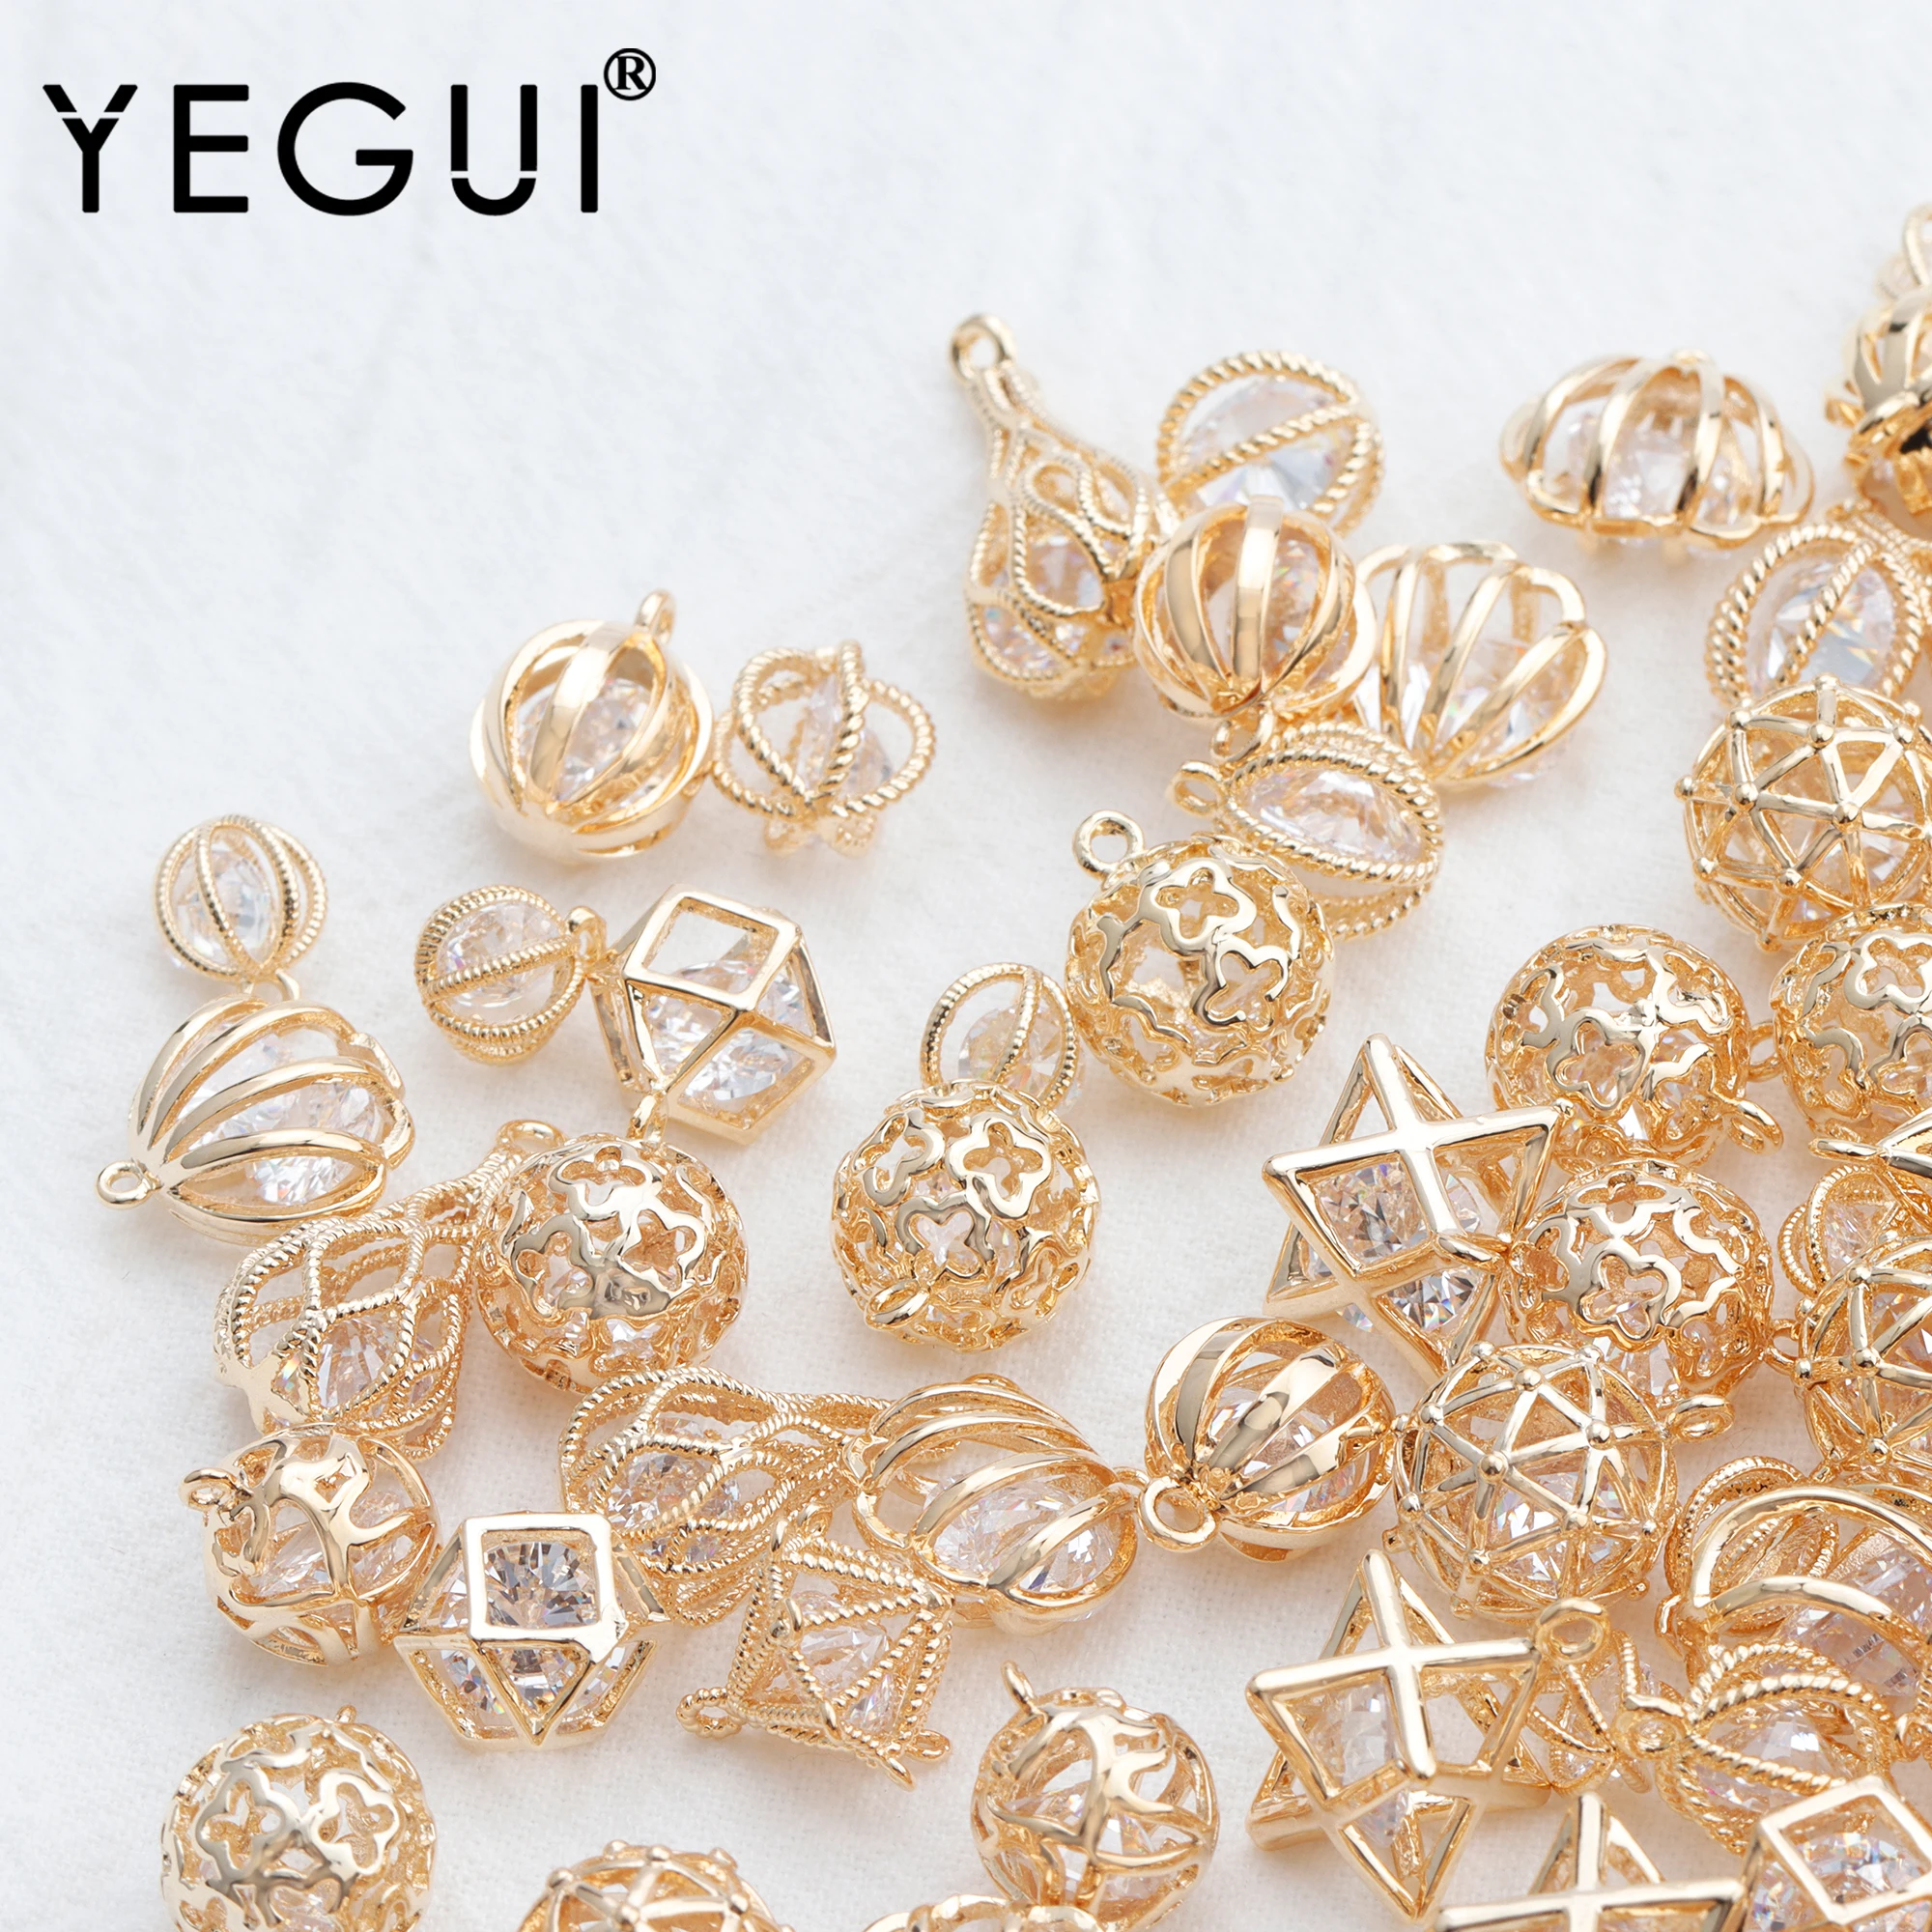 

YEGUI M829,jewelry accessories,18k gold plated,0.3 microns,zircon pendants,hand made,diy earrings,jewelry making,10pcs/lot